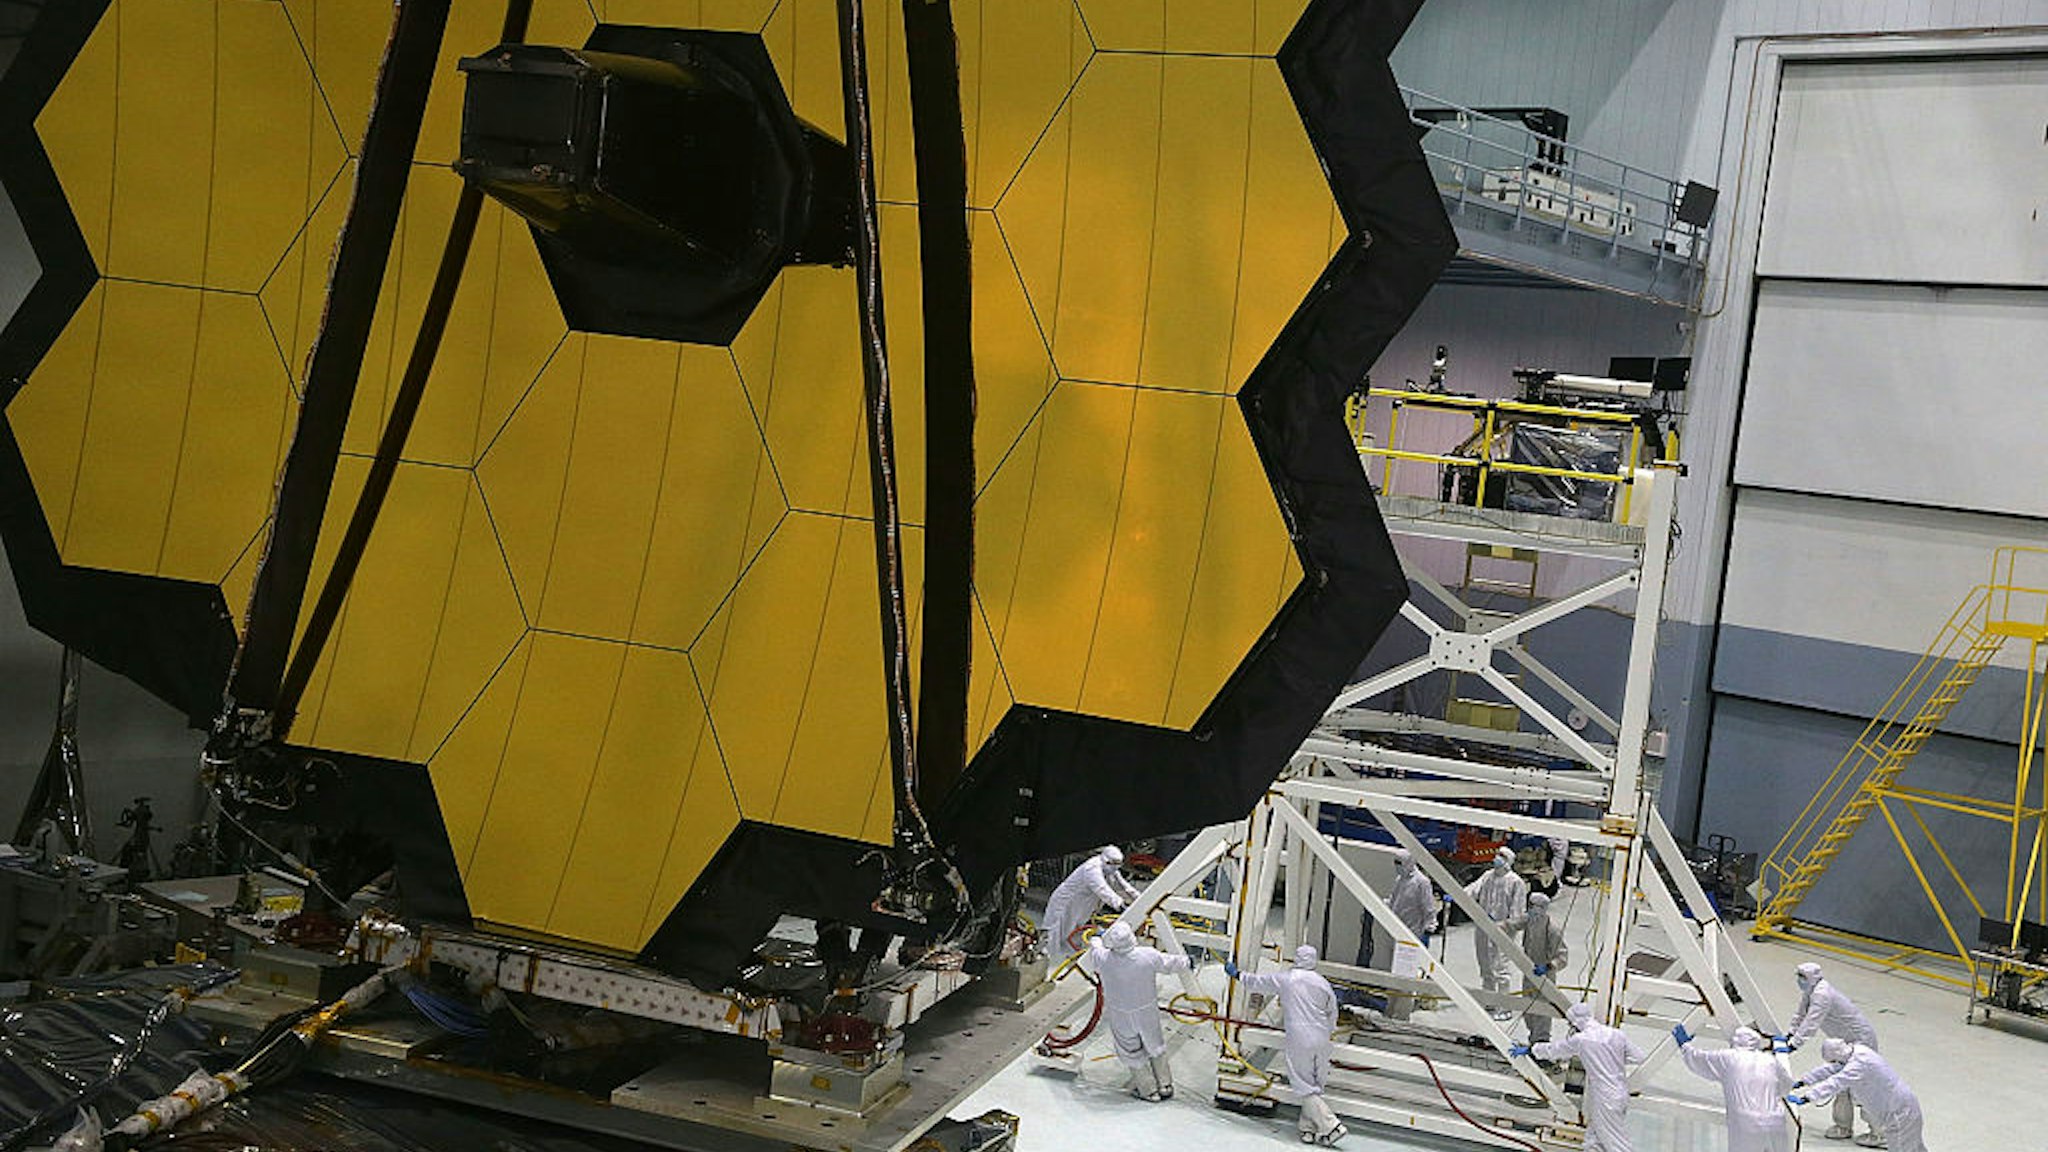 GREENBELT, MD - NOVEMBER 02: Engineers and technicians assemble the James Webb Space Telescope November 2, 2016 at NASA's Goddard Space Flight Center in Greenbelt, Maryland. The telescope, designed to be a large space-based observatory optimized for infrared wavelengths, will be the successor to the Hubble Space Telescope and the Spitzer Space Telescope. It is scheduled to be launched in October 2018. (Photo by Alex Wong/Getty Images)